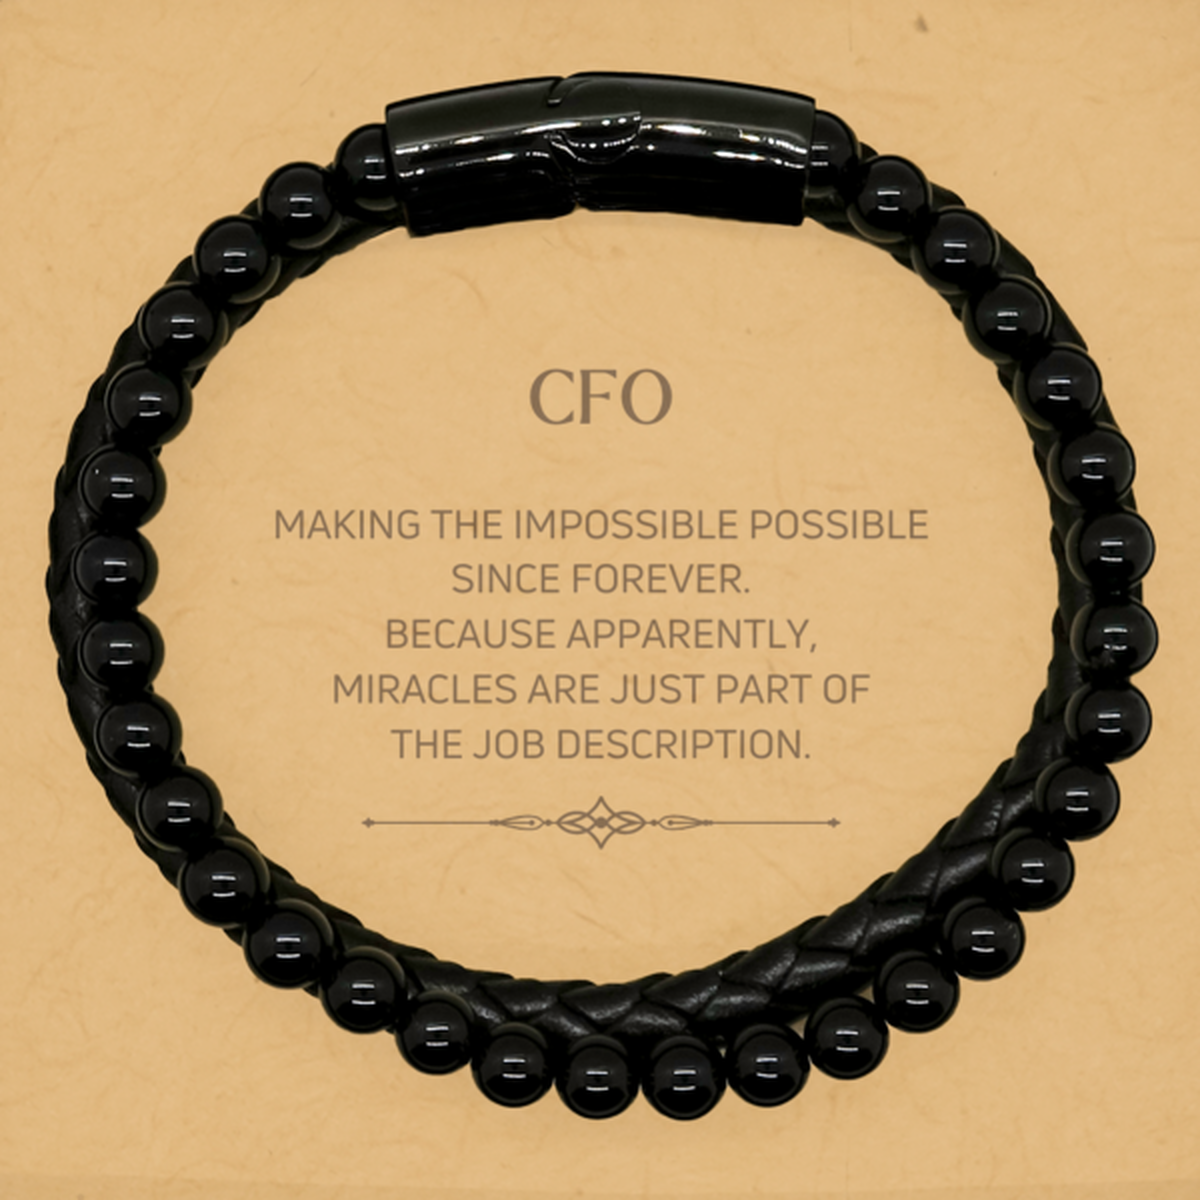 Funny CFO Gifts, Miracles are just part of the job description, Inspirational Birthday Stone Leather Bracelets For CFO, Men, Women, Coworkers, Friends, Boss